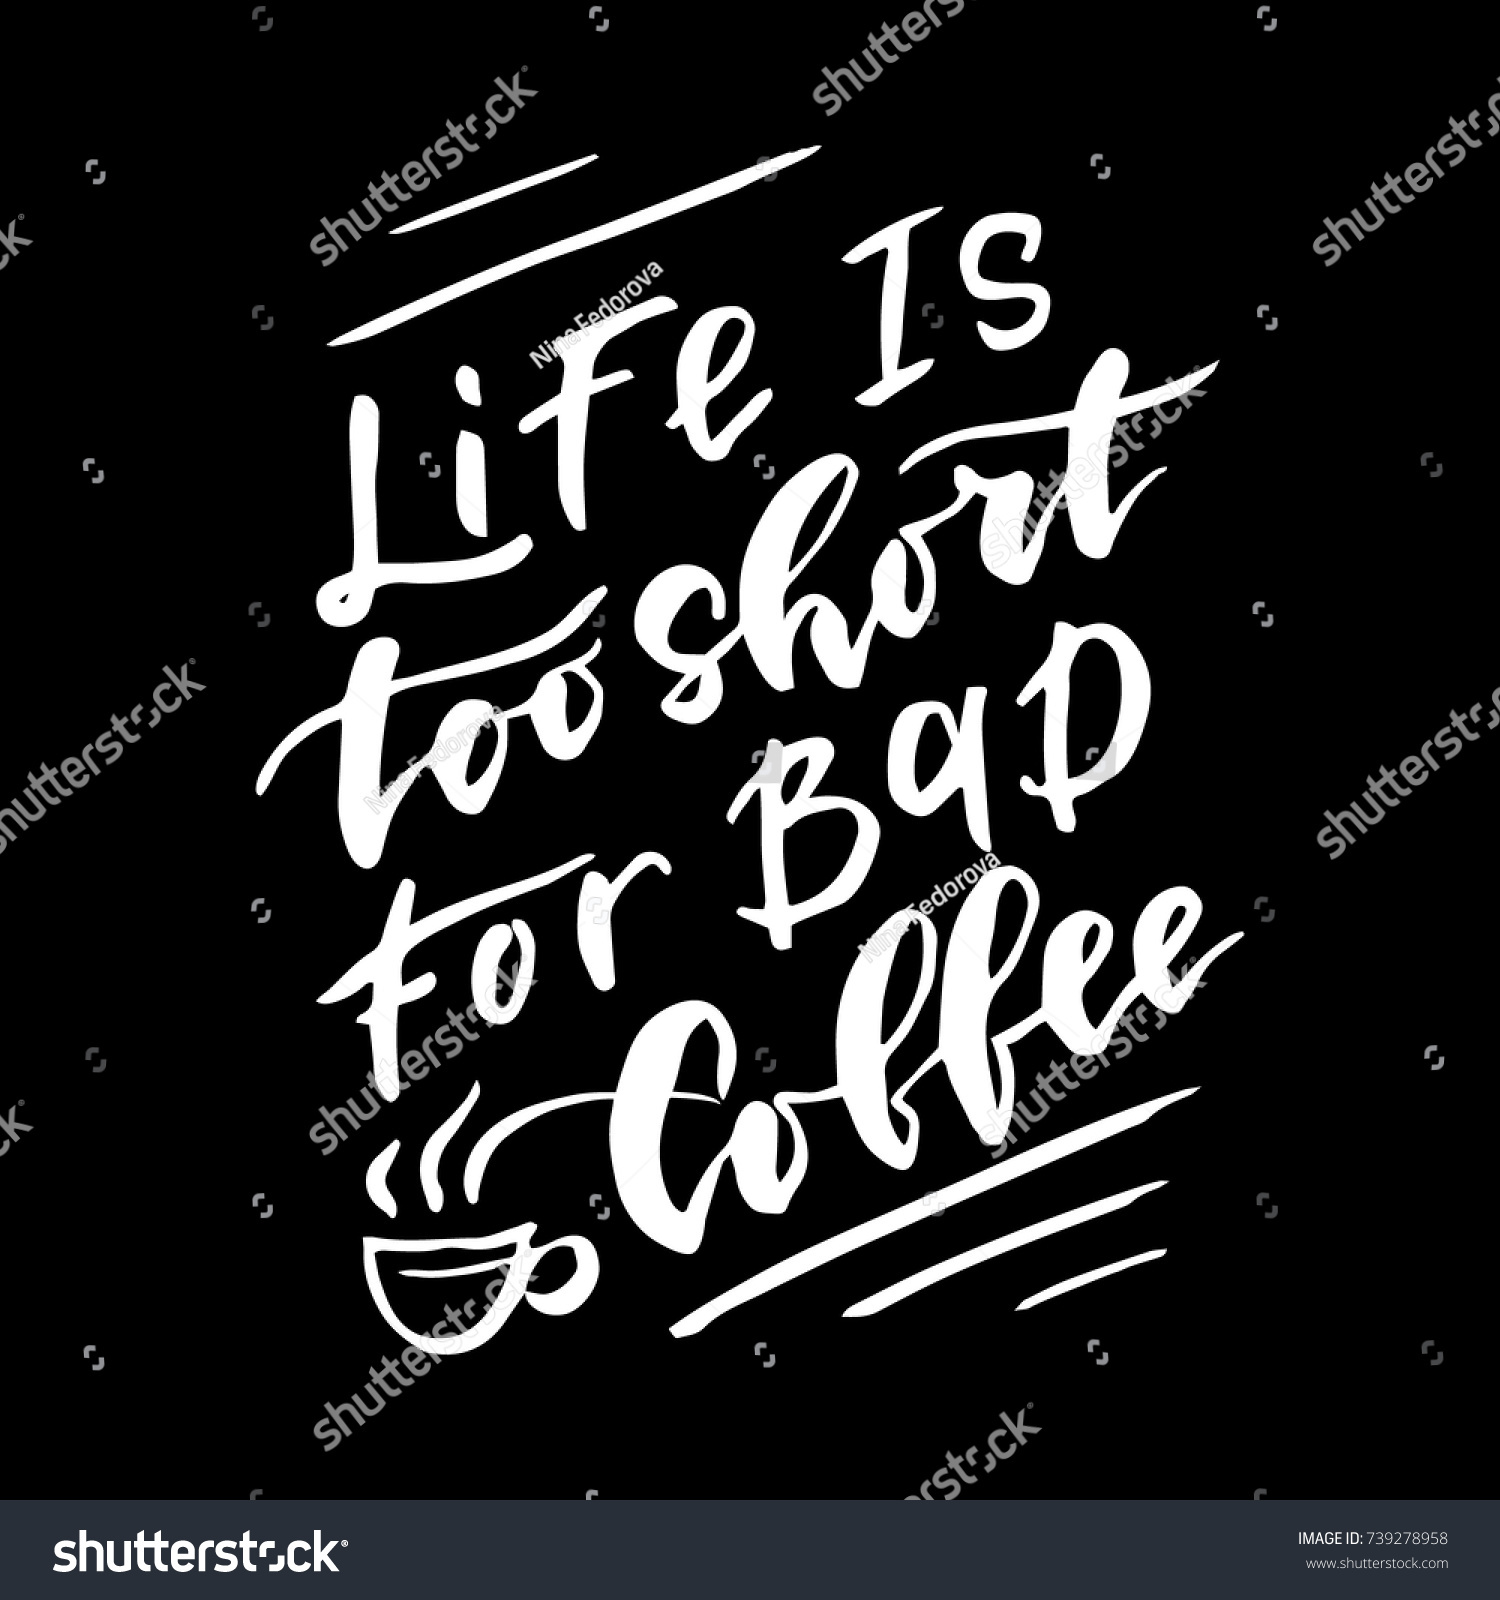 Life is too short for bad coffee Inspirational quote Hand drawn illustration with hand